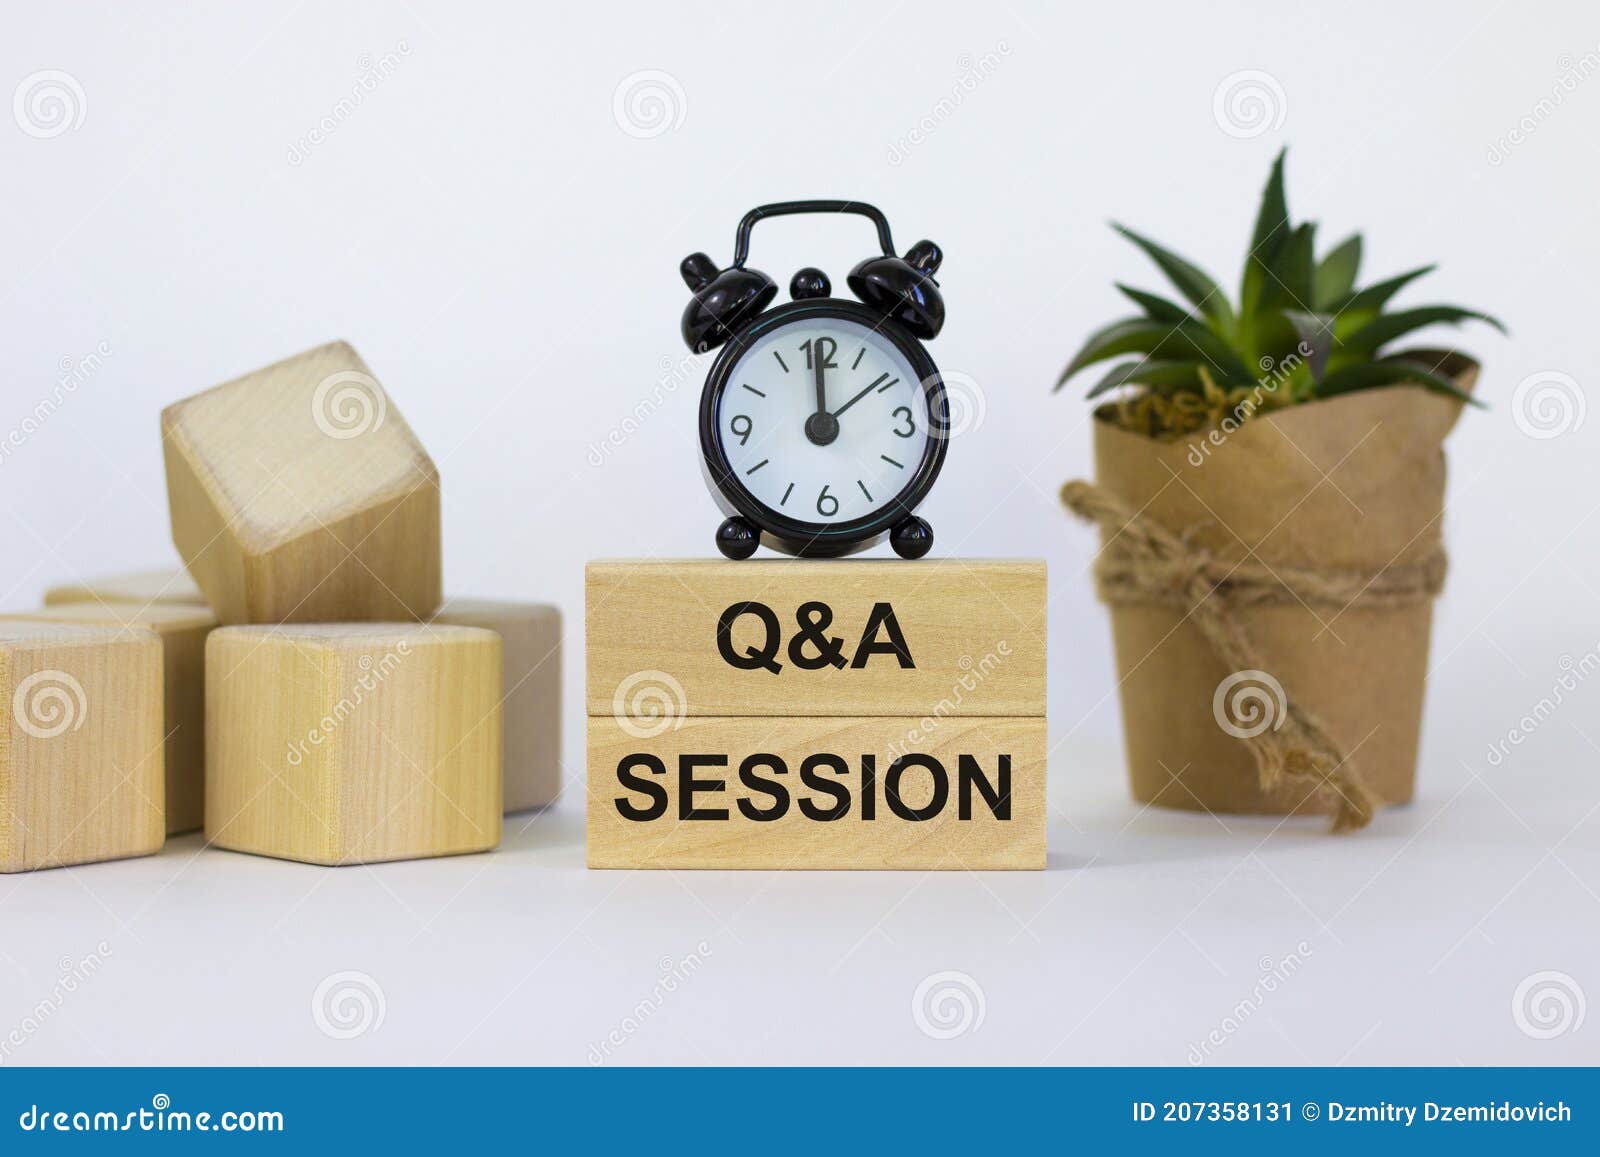 q and a, questions and answers session . concept words `q and a session` on wooden blocks on a beautiful white background.